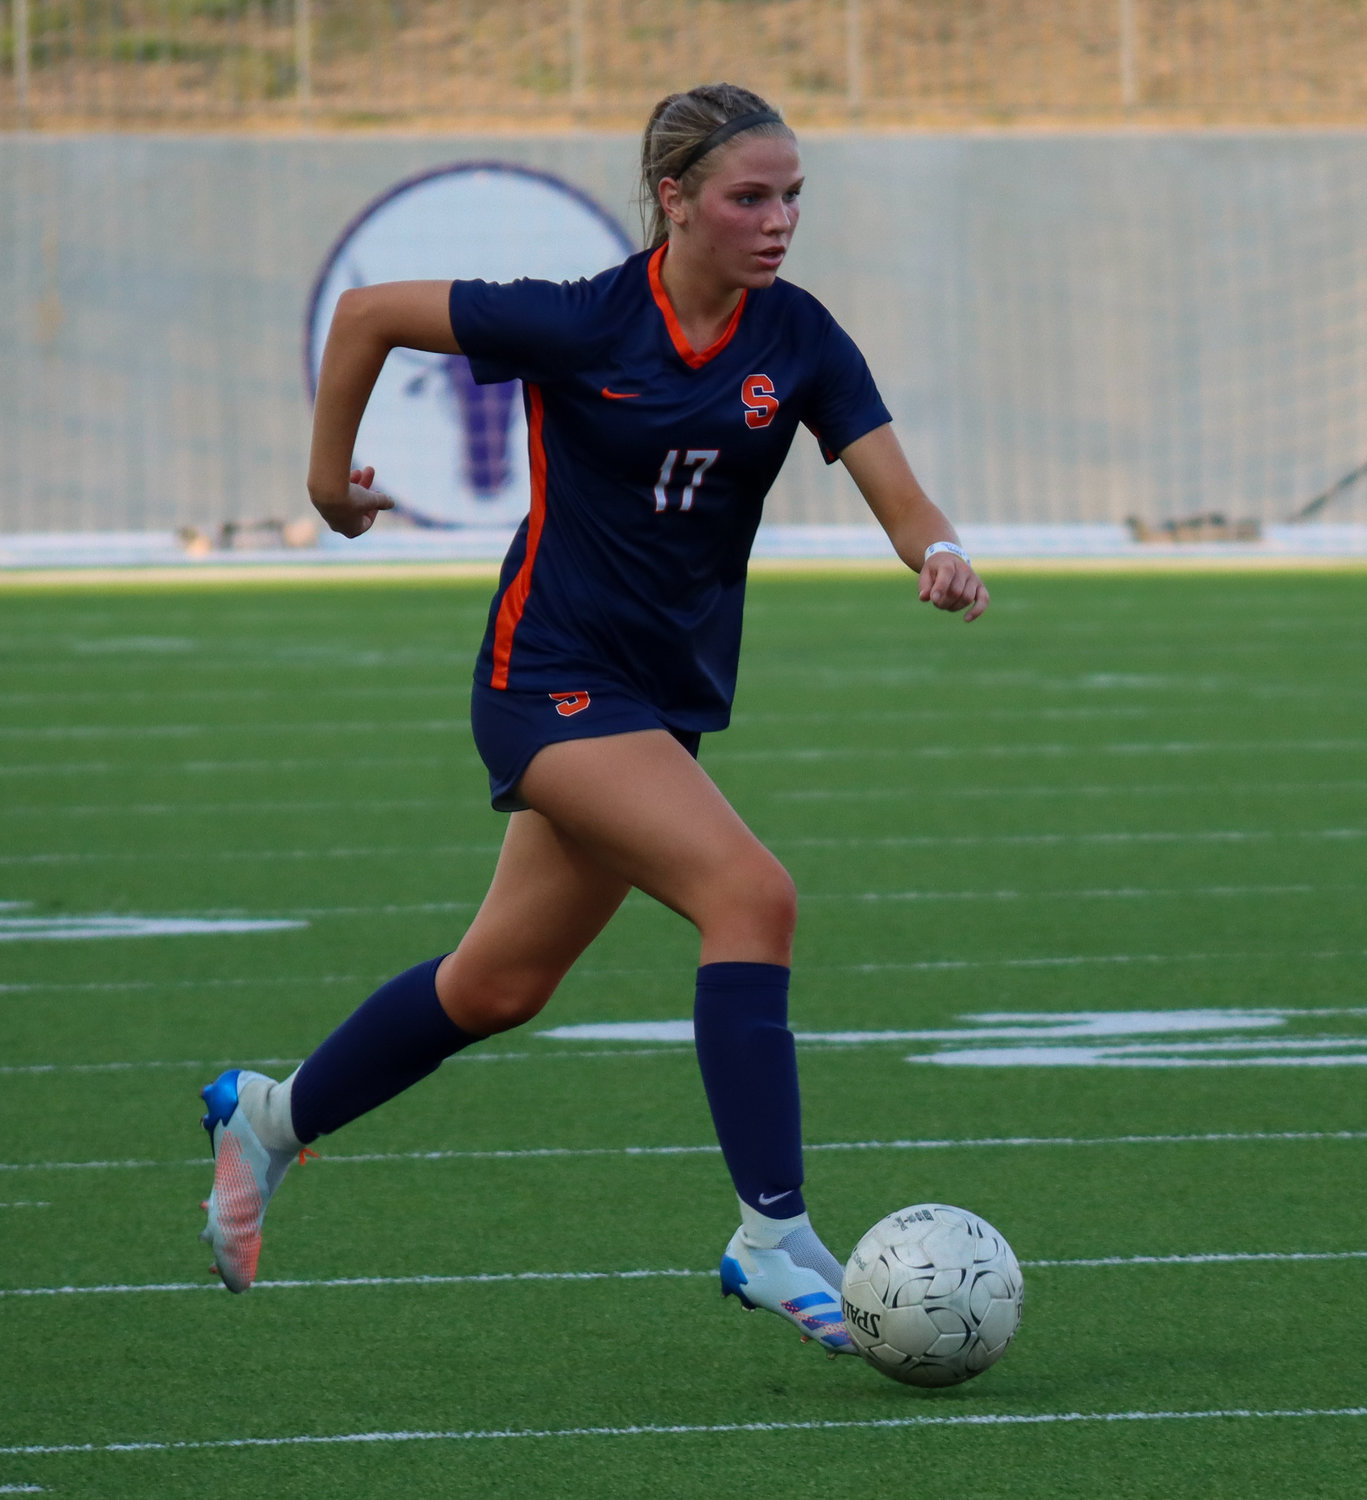 Seven Lakes sophomore forward Haydan Erck notched a hat-trick versus Elkins, scoring three goals in the Spartans’ 7-0 Class 6A bi-district playoff win on Friday, March 26, at Legacy Stadium.